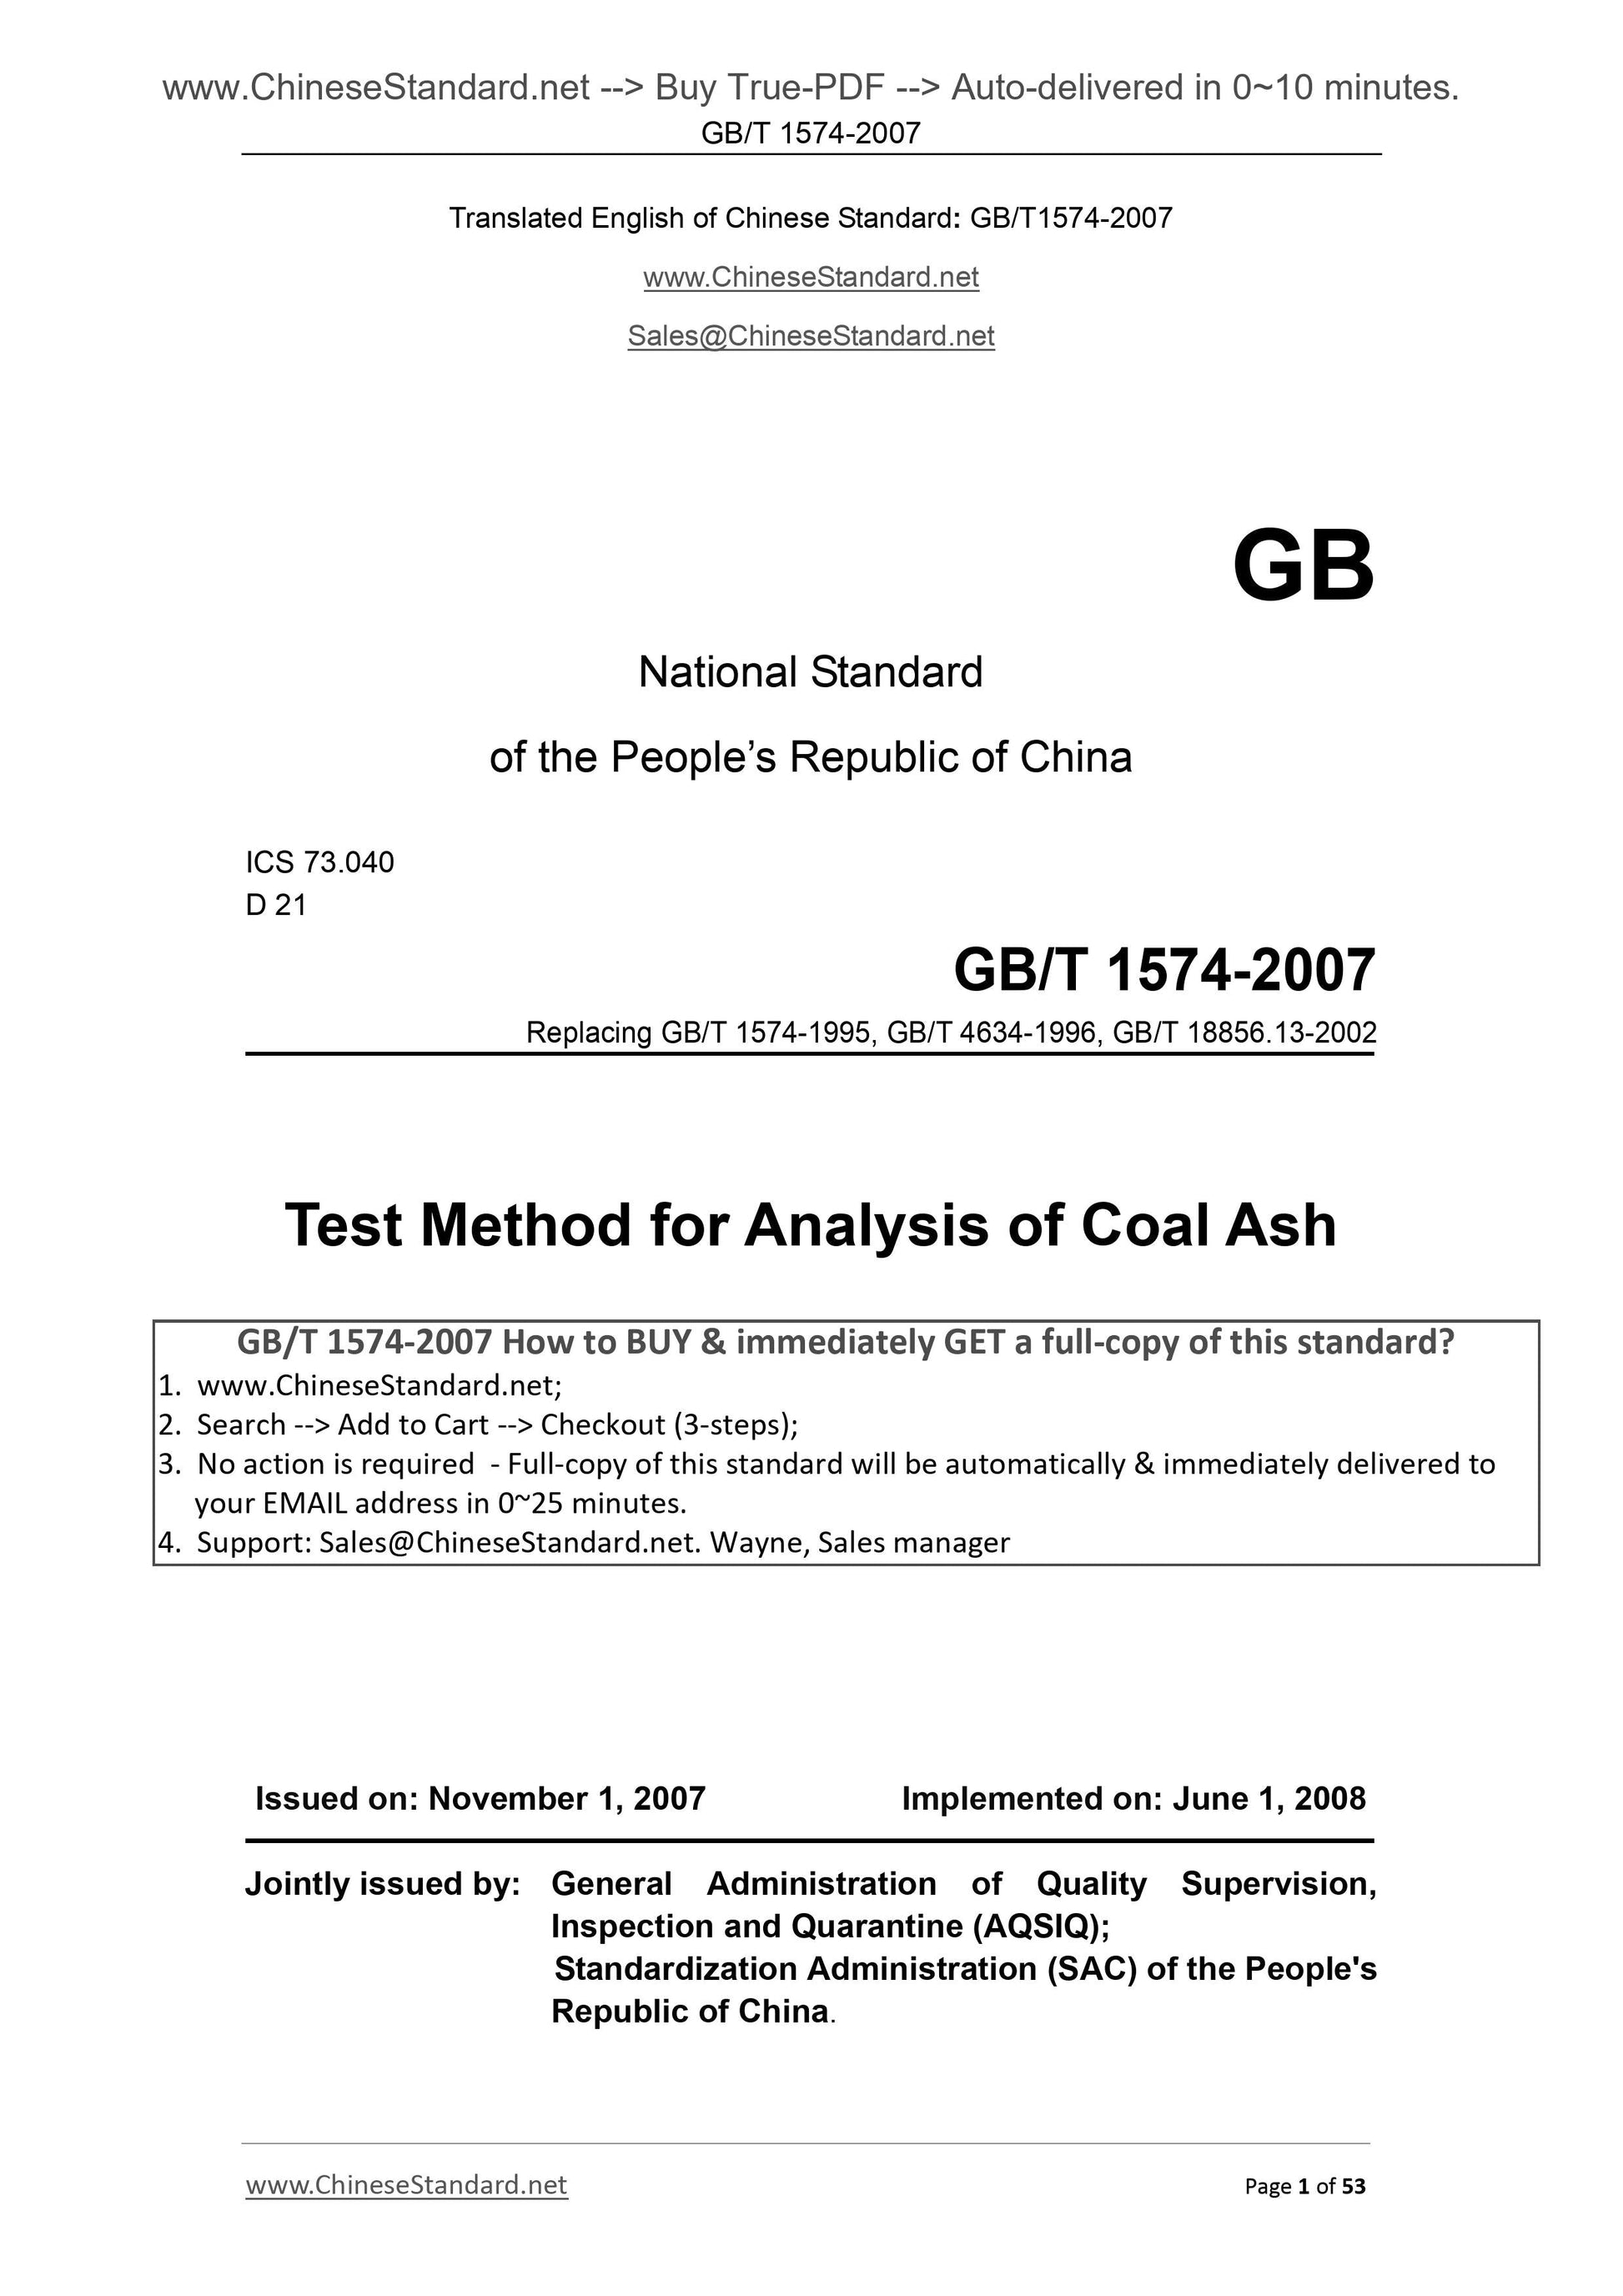 GB/T 1574-2007 Page 1